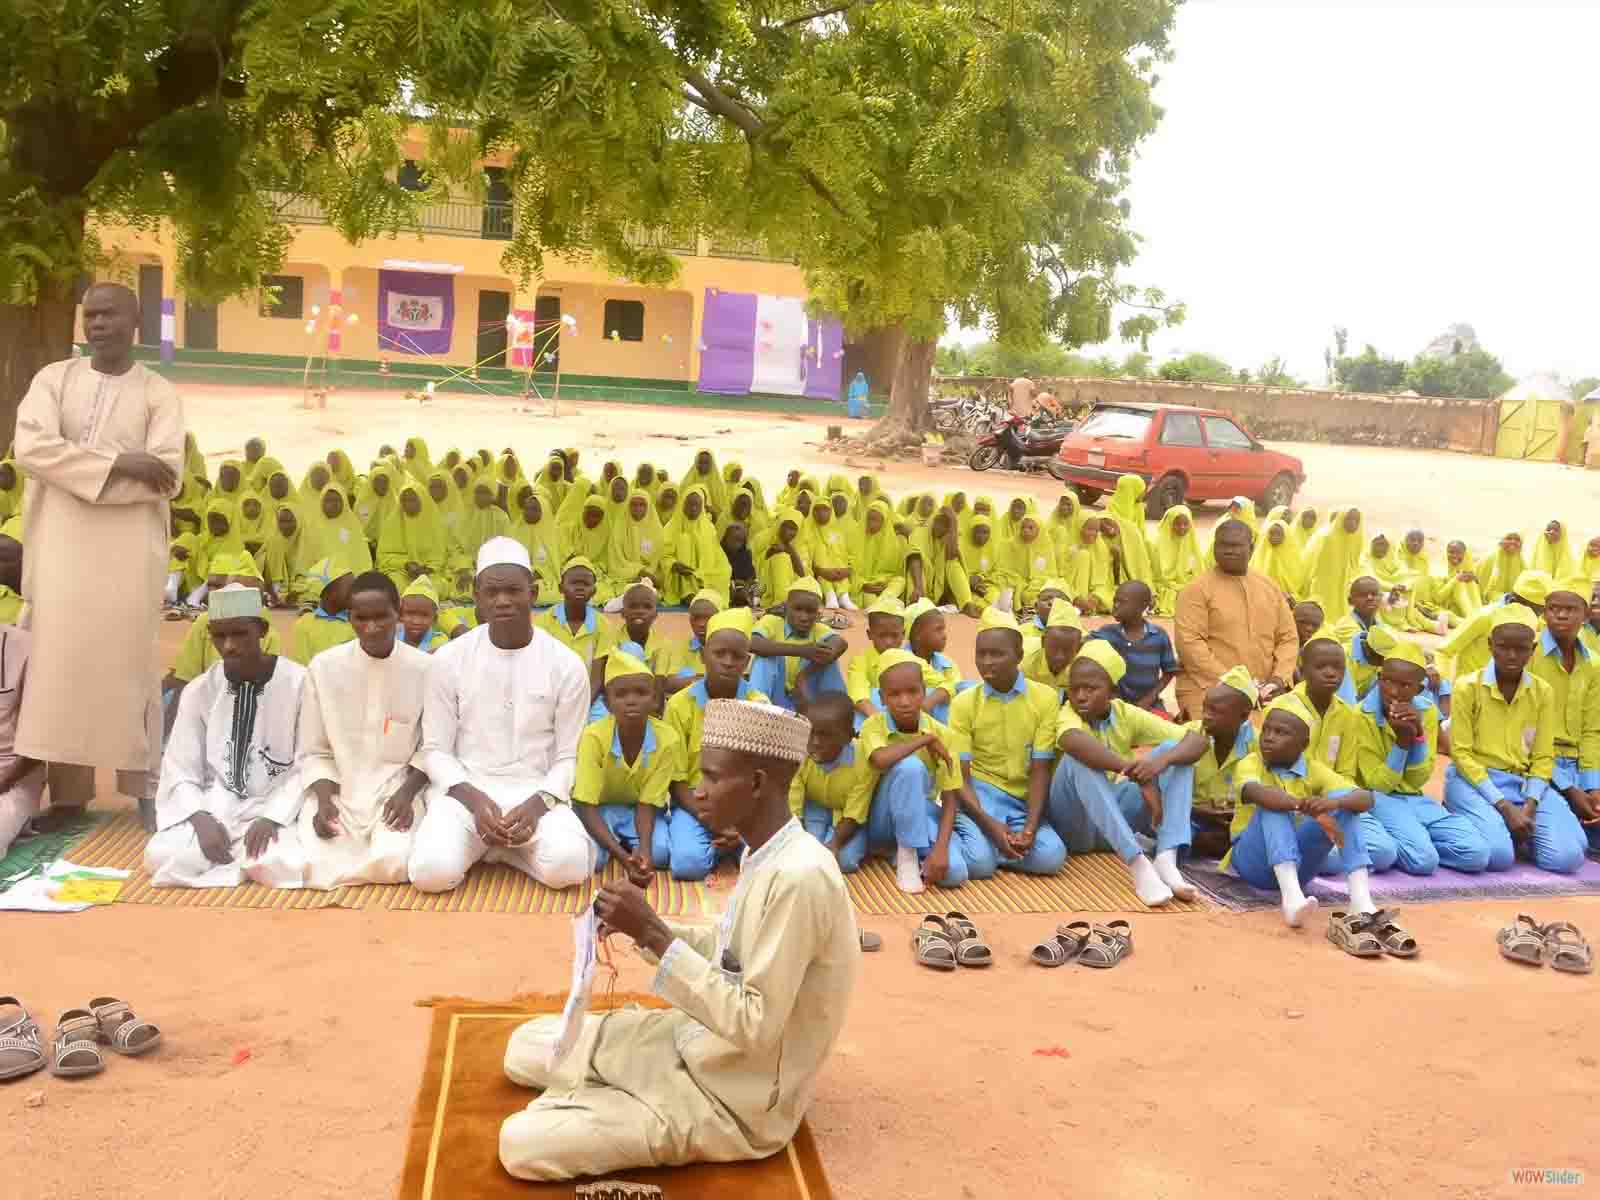 Male and Female Students at Prayer Ground